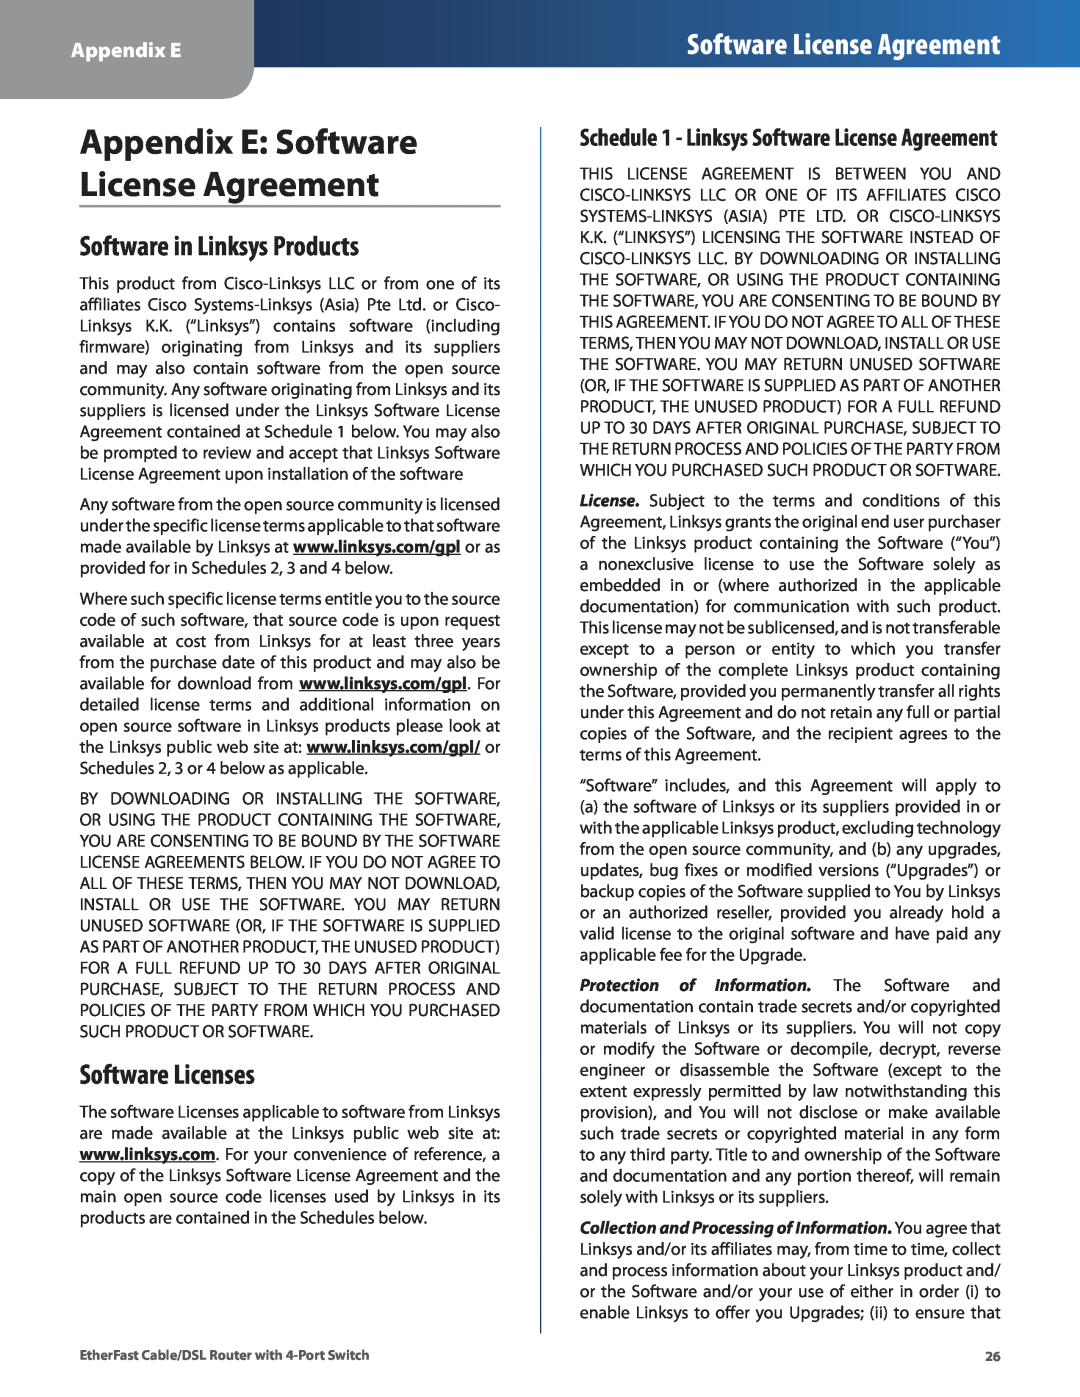 Honeywell HEMS II manual Appendix E Software License Agreement, Software in Linksys Products, Software Licenses 